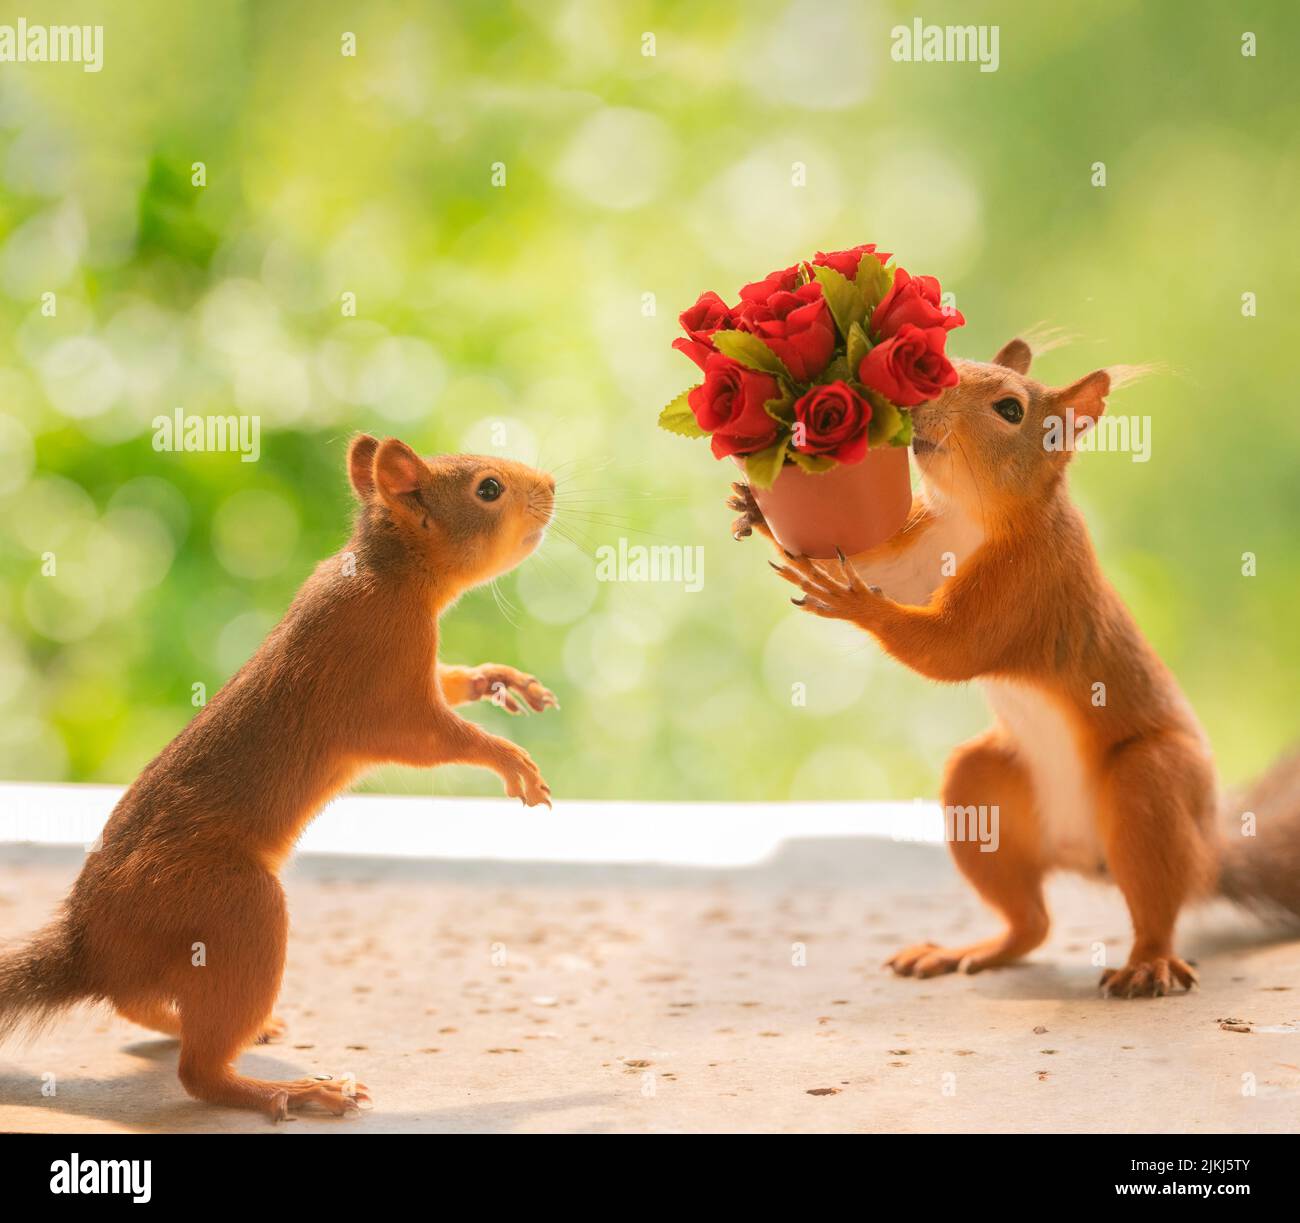 Red Squirrels with a rose bouquet Stock Photo